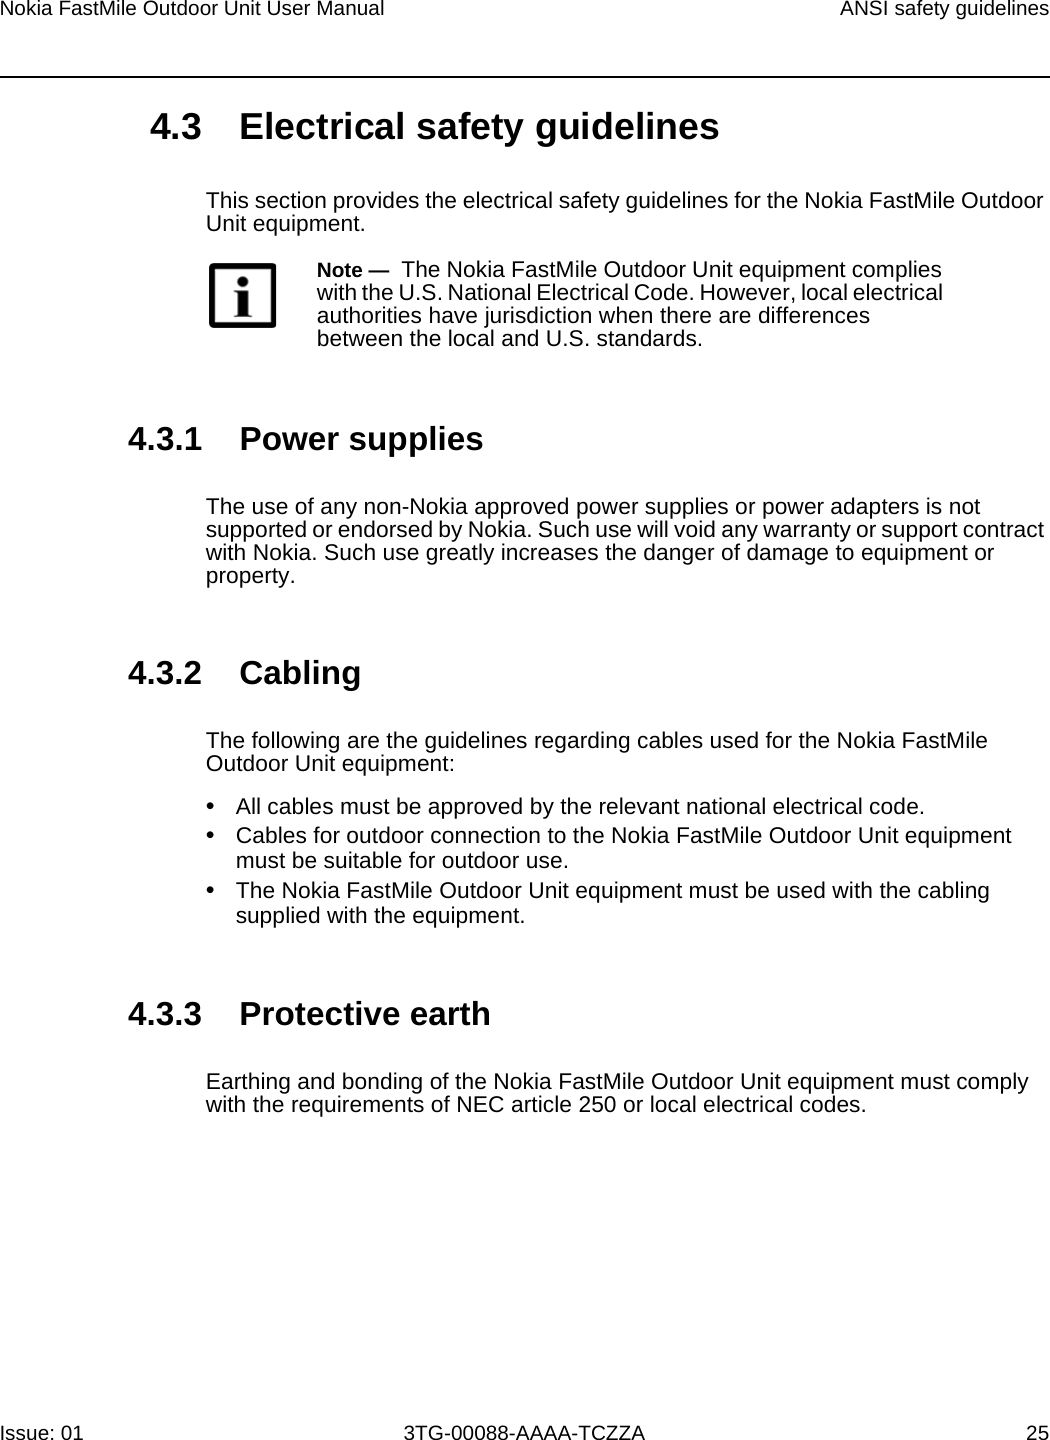 Nokia FastMile Outdoor Unit User Manual ANSI safety guidelinesIssue: 01 3TG-00088-AAAA-TCZZA 254.3 Electrical safety guidelinesThis section provides the electrical safety guidelines for the Nokia FastMile Outdoor Unit equipment.4.3.1 Power suppliesThe use of any non-Nokia approved power supplies or power adapters is not supported or endorsed by Nokia. Such use will void any warranty or support contract with Nokia. Such use greatly increases the danger of damage to equipment or property.4.3.2 CablingThe following are the guidelines regarding cables used for the Nokia FastMile Outdoor Unit equipment:•All cables must be approved by the relevant national electrical code.•Cables for outdoor connection to the Nokia FastMile Outdoor Unit equipmentmust be suitable for outdoor use.•The Nokia FastMile Outdoor Unit equipment must be used with the cablingsupplied with the equipment.4.3.3 Protective earthEarthing and bonding of the Nokia FastMile Outdoor Unit equipment must comply with the requirements of NEC article 250 or local electrical codes.Note —  The Nokia FastMile Outdoor Unit equipment complies with the U.S. National Electrical Code. However, local electrical authorities have jurisdiction when there are differences between the local and U.S. standards.